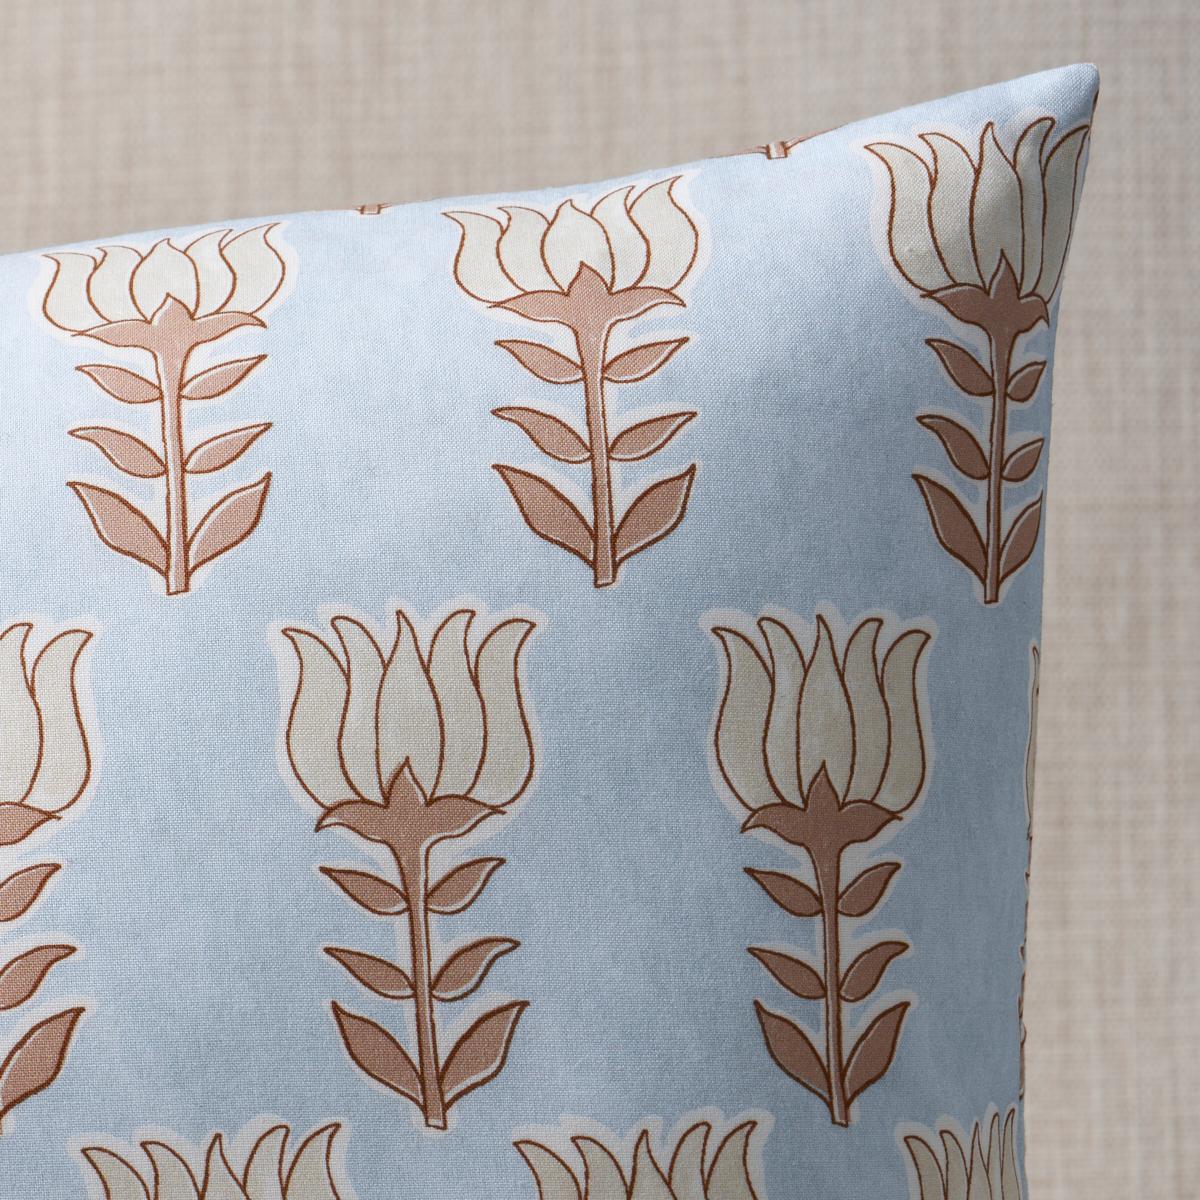 This pillow features Mia Tulip with a knife edge finish. Based on hand-drawn artwork from our studio, Mia Tulip is a simple stylized floral printed slightly off-register on fine cotton to evoke the look of a traditional block print. Pillow includes